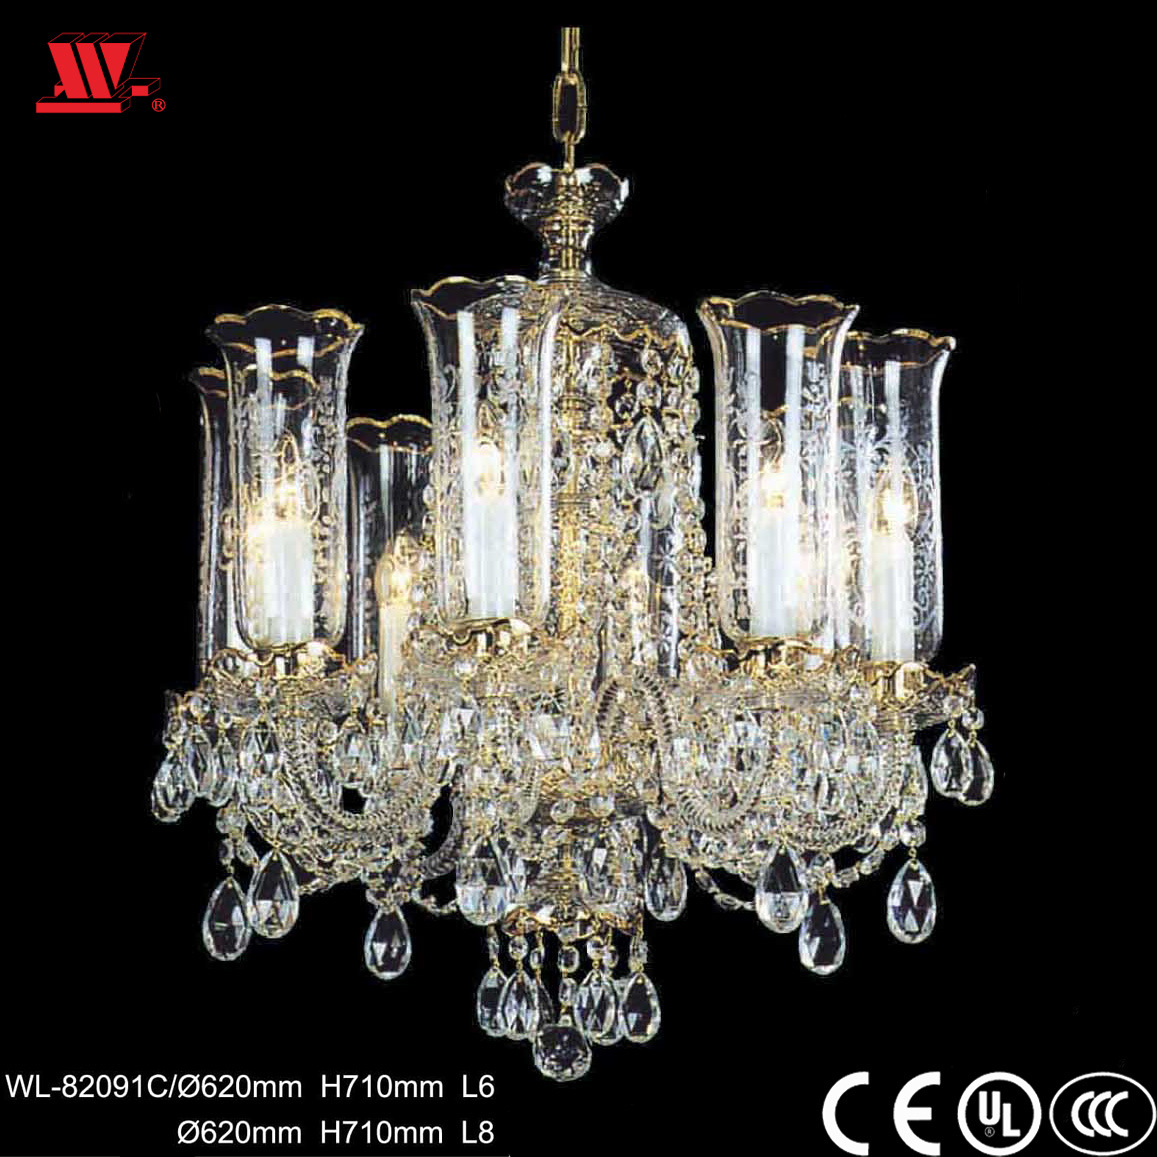 Traditional Crystal Chandelier with Glass Decoration Wl-82091c